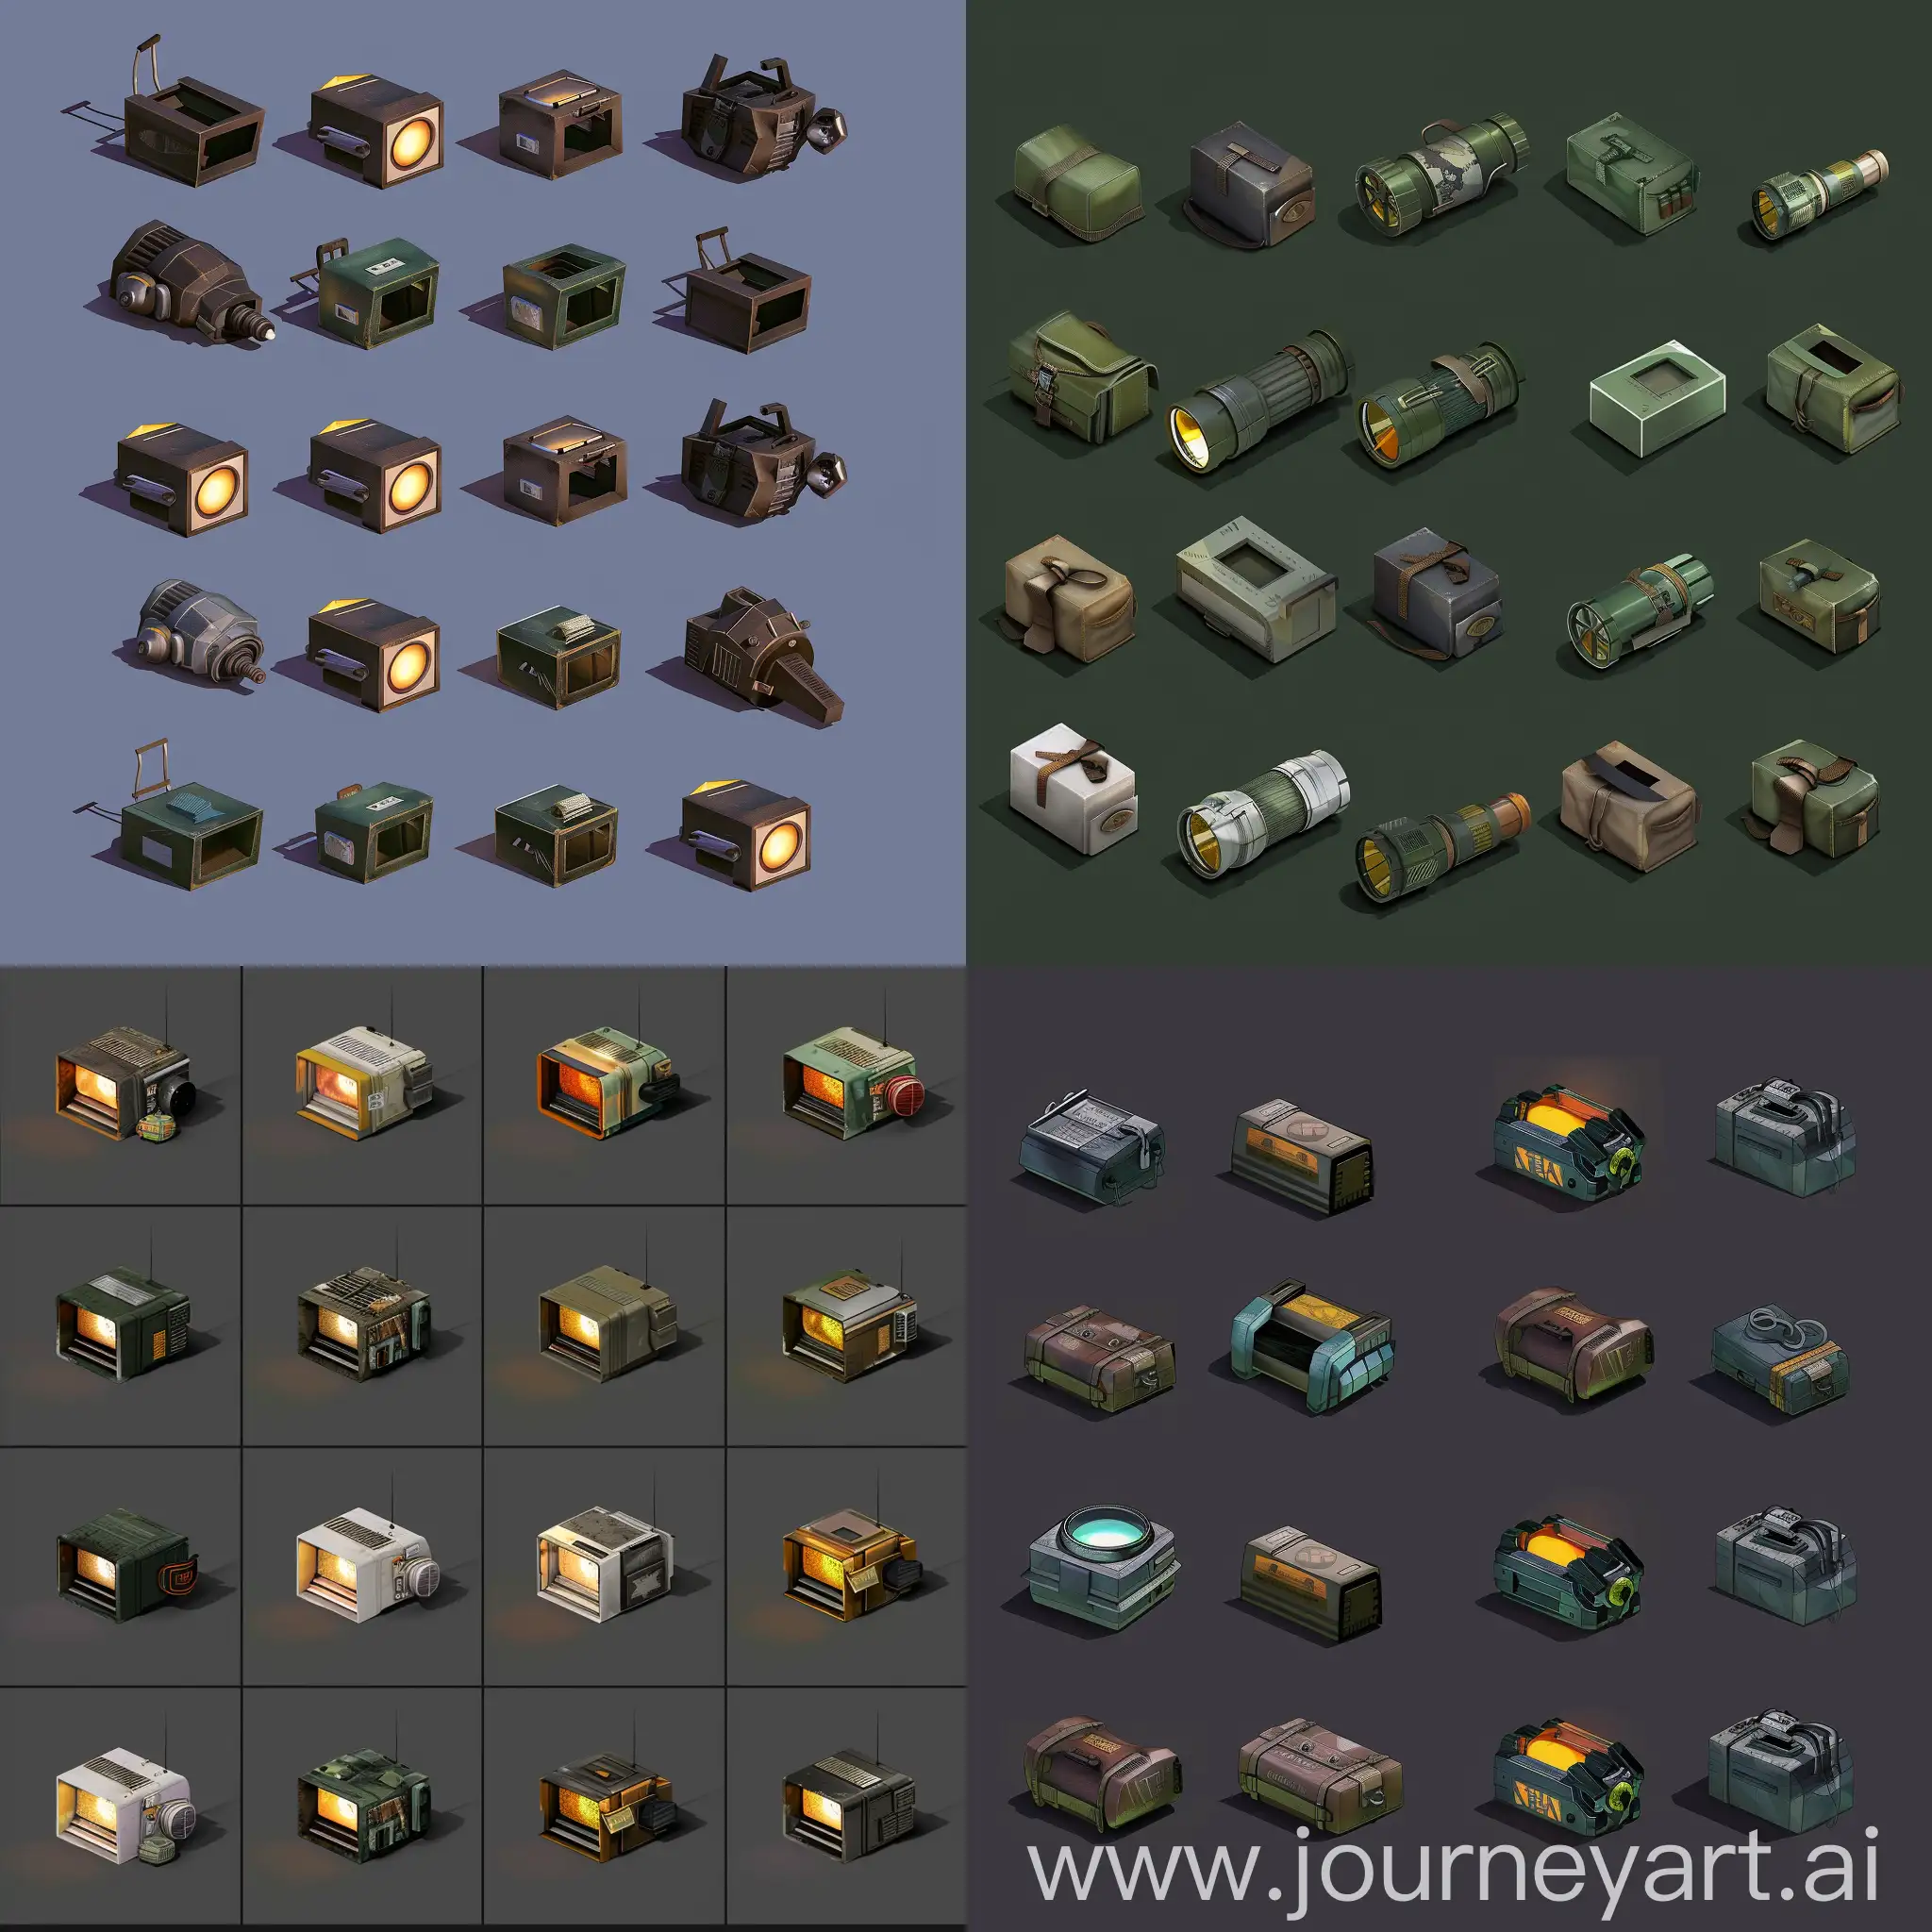 https://i.imgur.com/BK7uKCi.png realistic photo isometric set of worn realistic tactical headlamp device in style of blender realistic 3d games asset, isometric set --chaos 20
